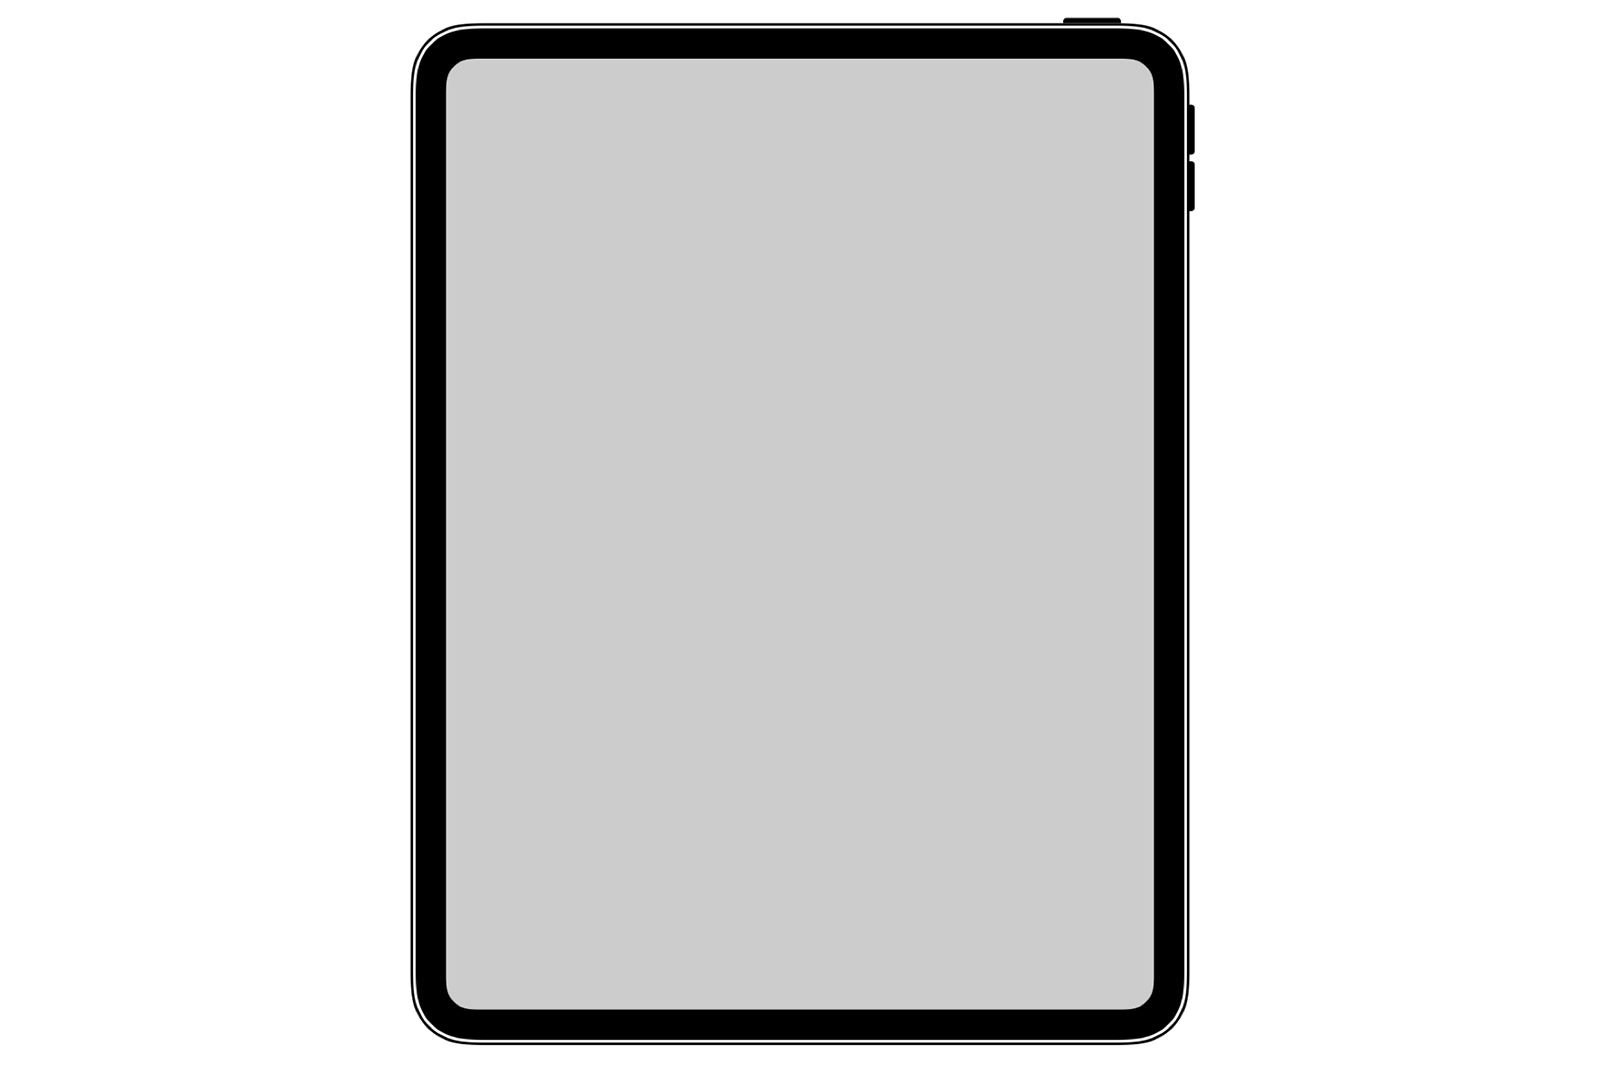 This is the iPad Pro as found in official iOS code image 1